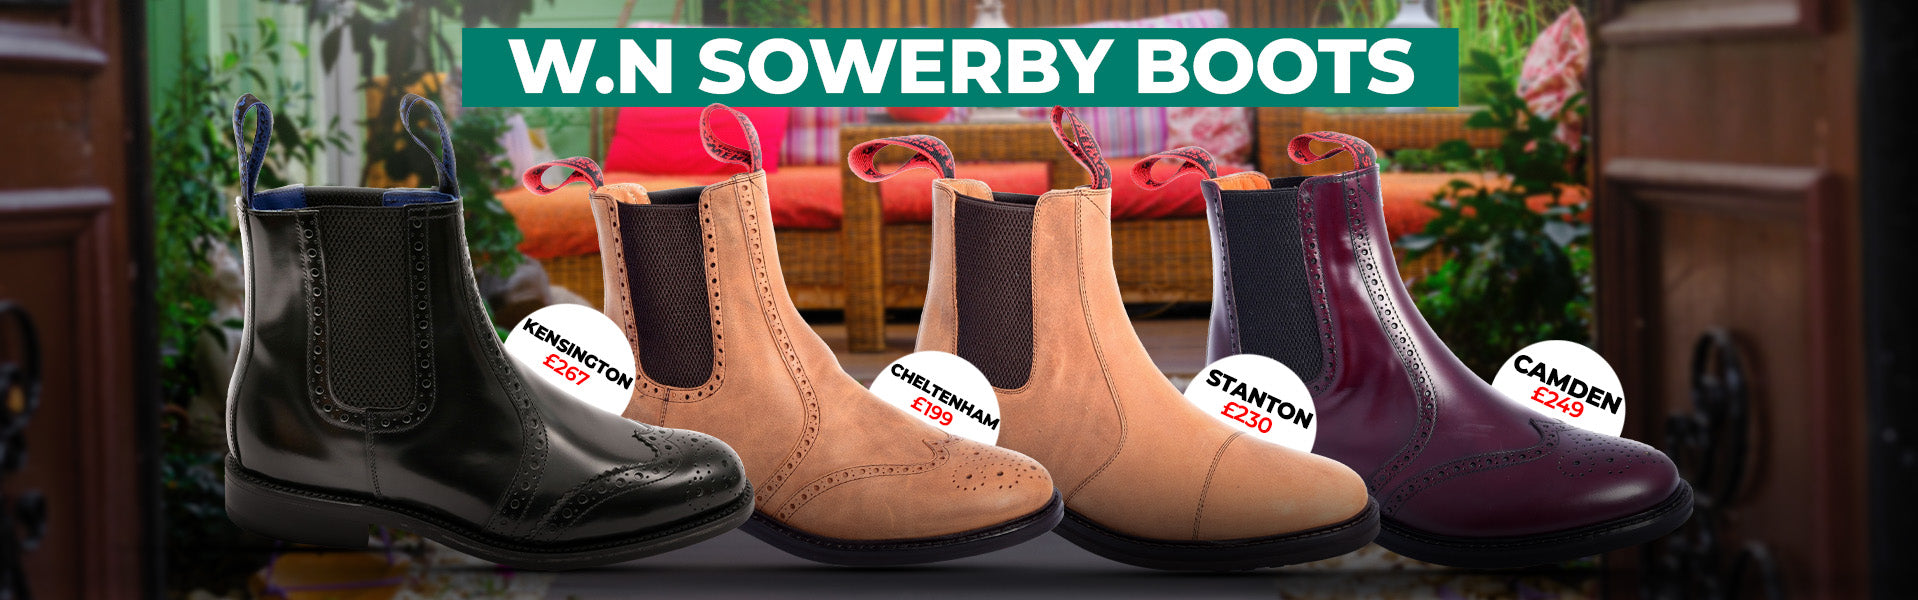 Sowerbys Shoes